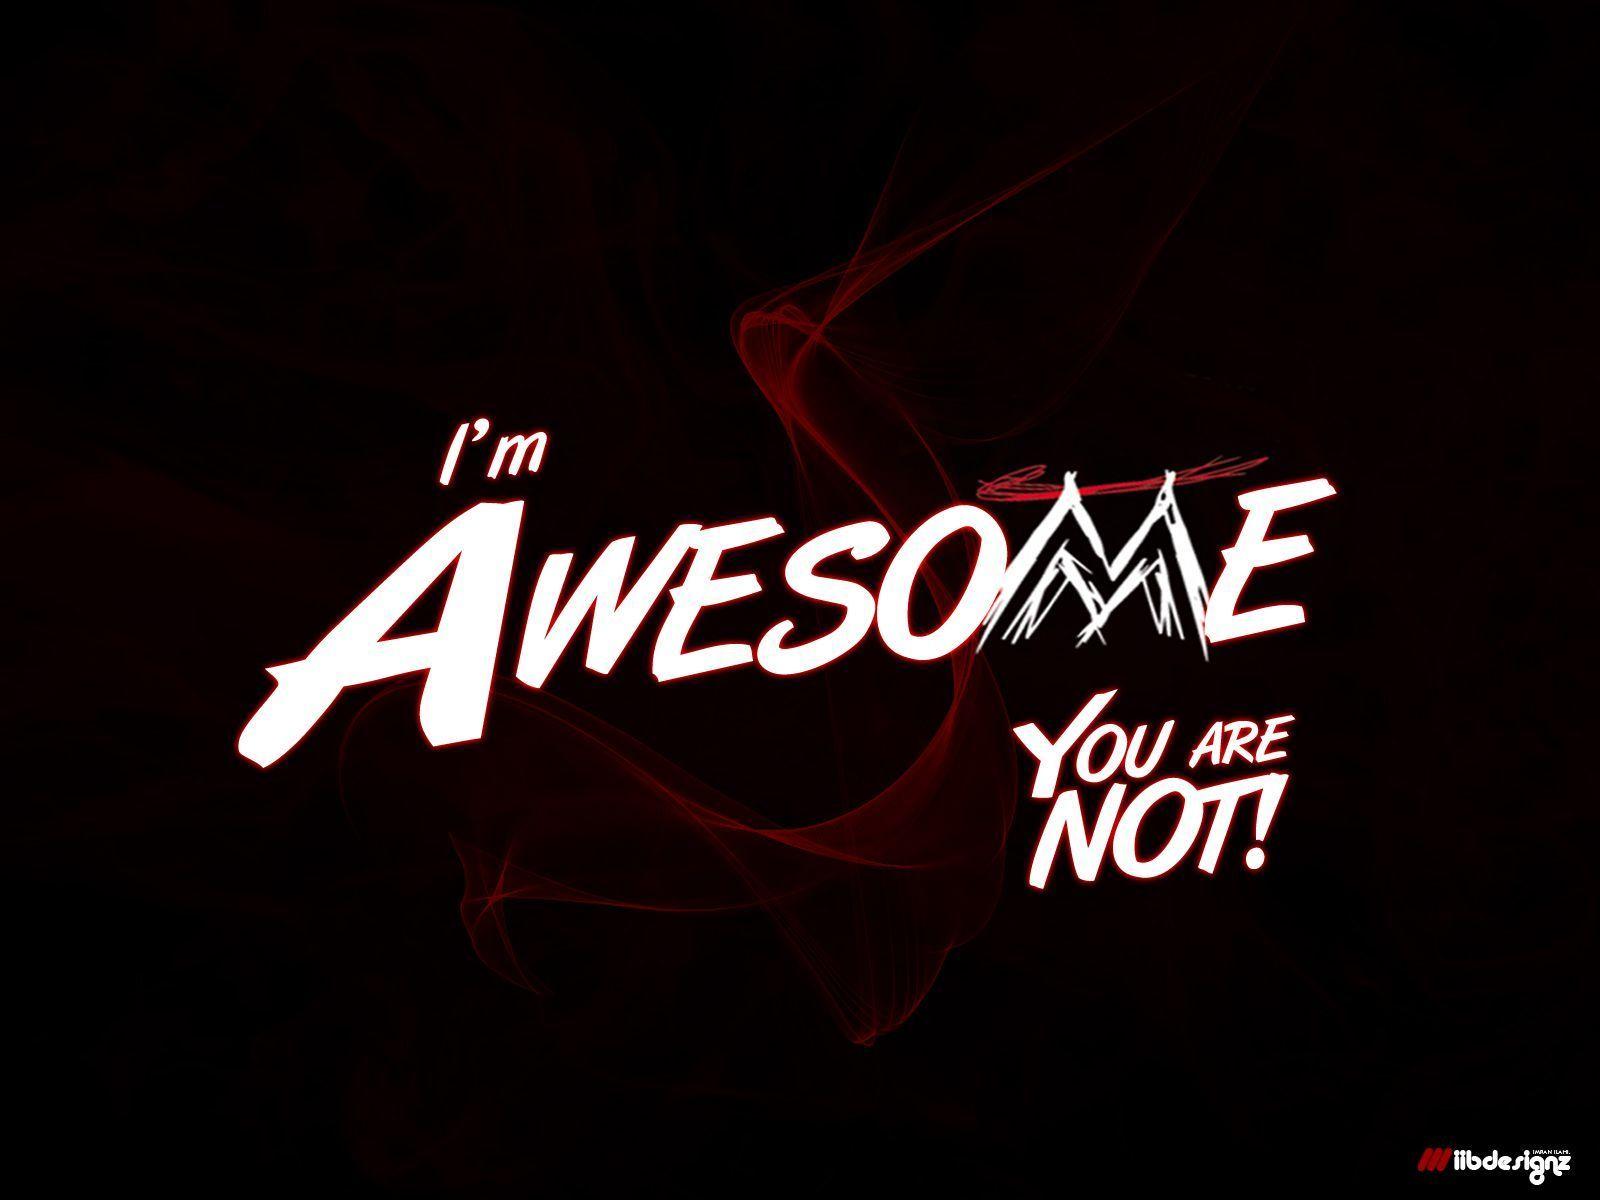 Im Awesome Desktop Pc And Mac Wallpaper. download